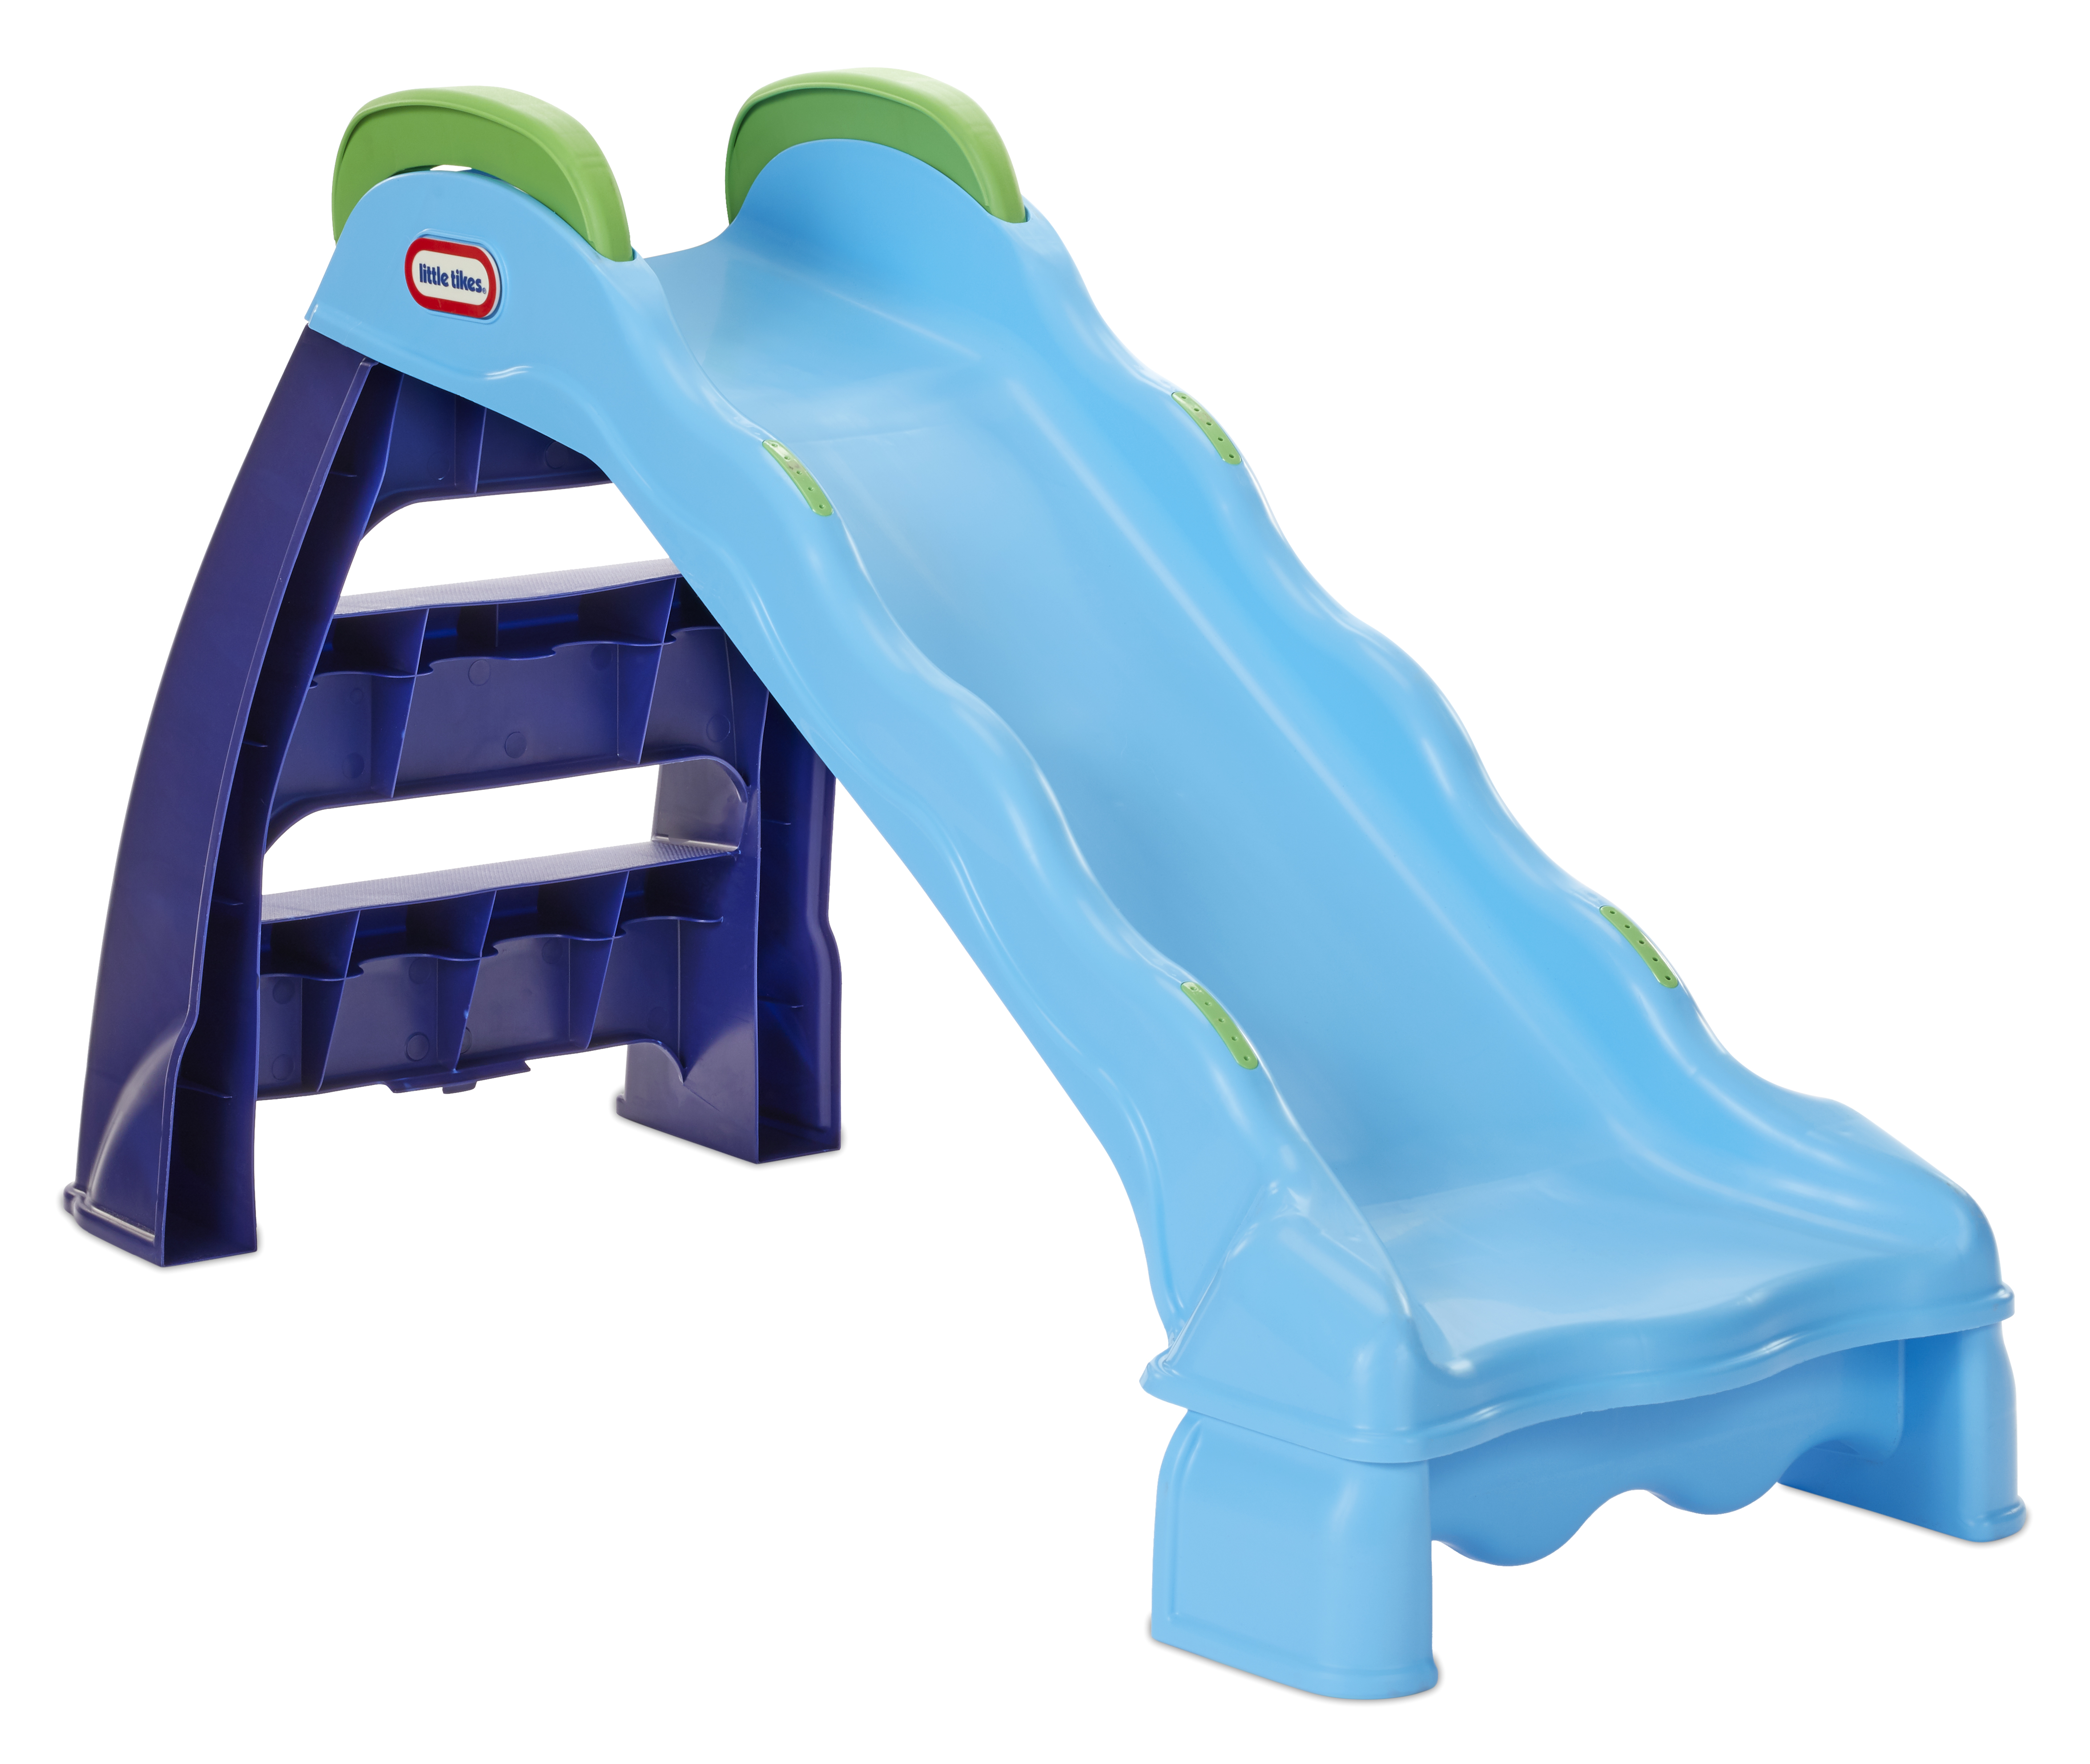 Little Tikes 2-in-1 Outdoor-Indoor Wet or Dry Slide Playground Slide with Folding For Easy Storage, Blue- For Kids Toddlers Boys Girls Ages 2 to 6 Year Old - image 1 of 9